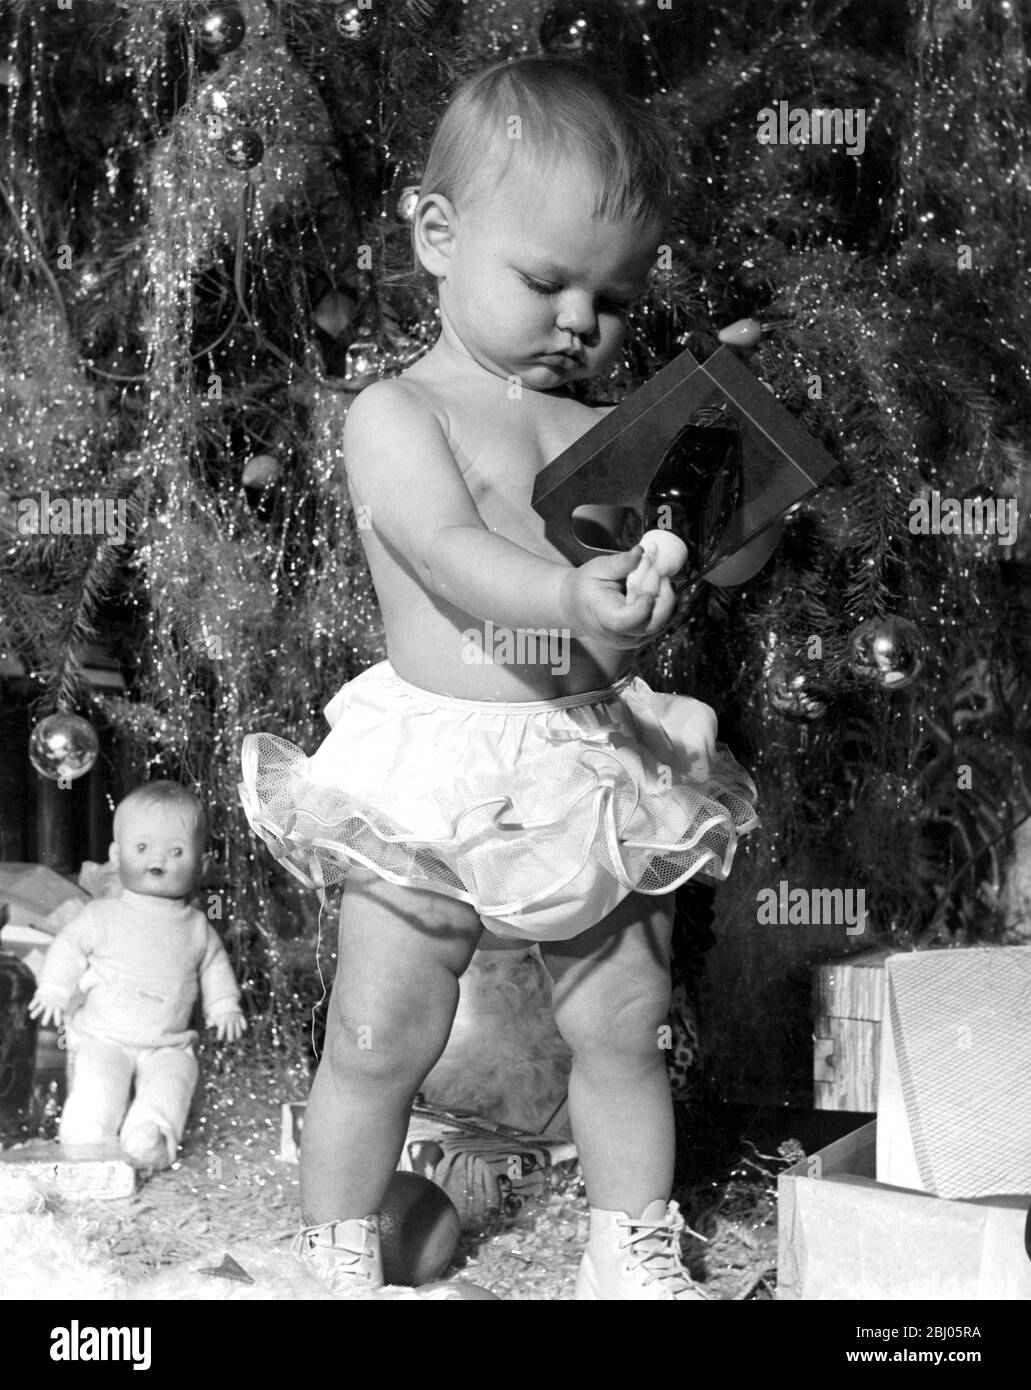 Toddler examining toy underneath the Christmas tree Stock Photo